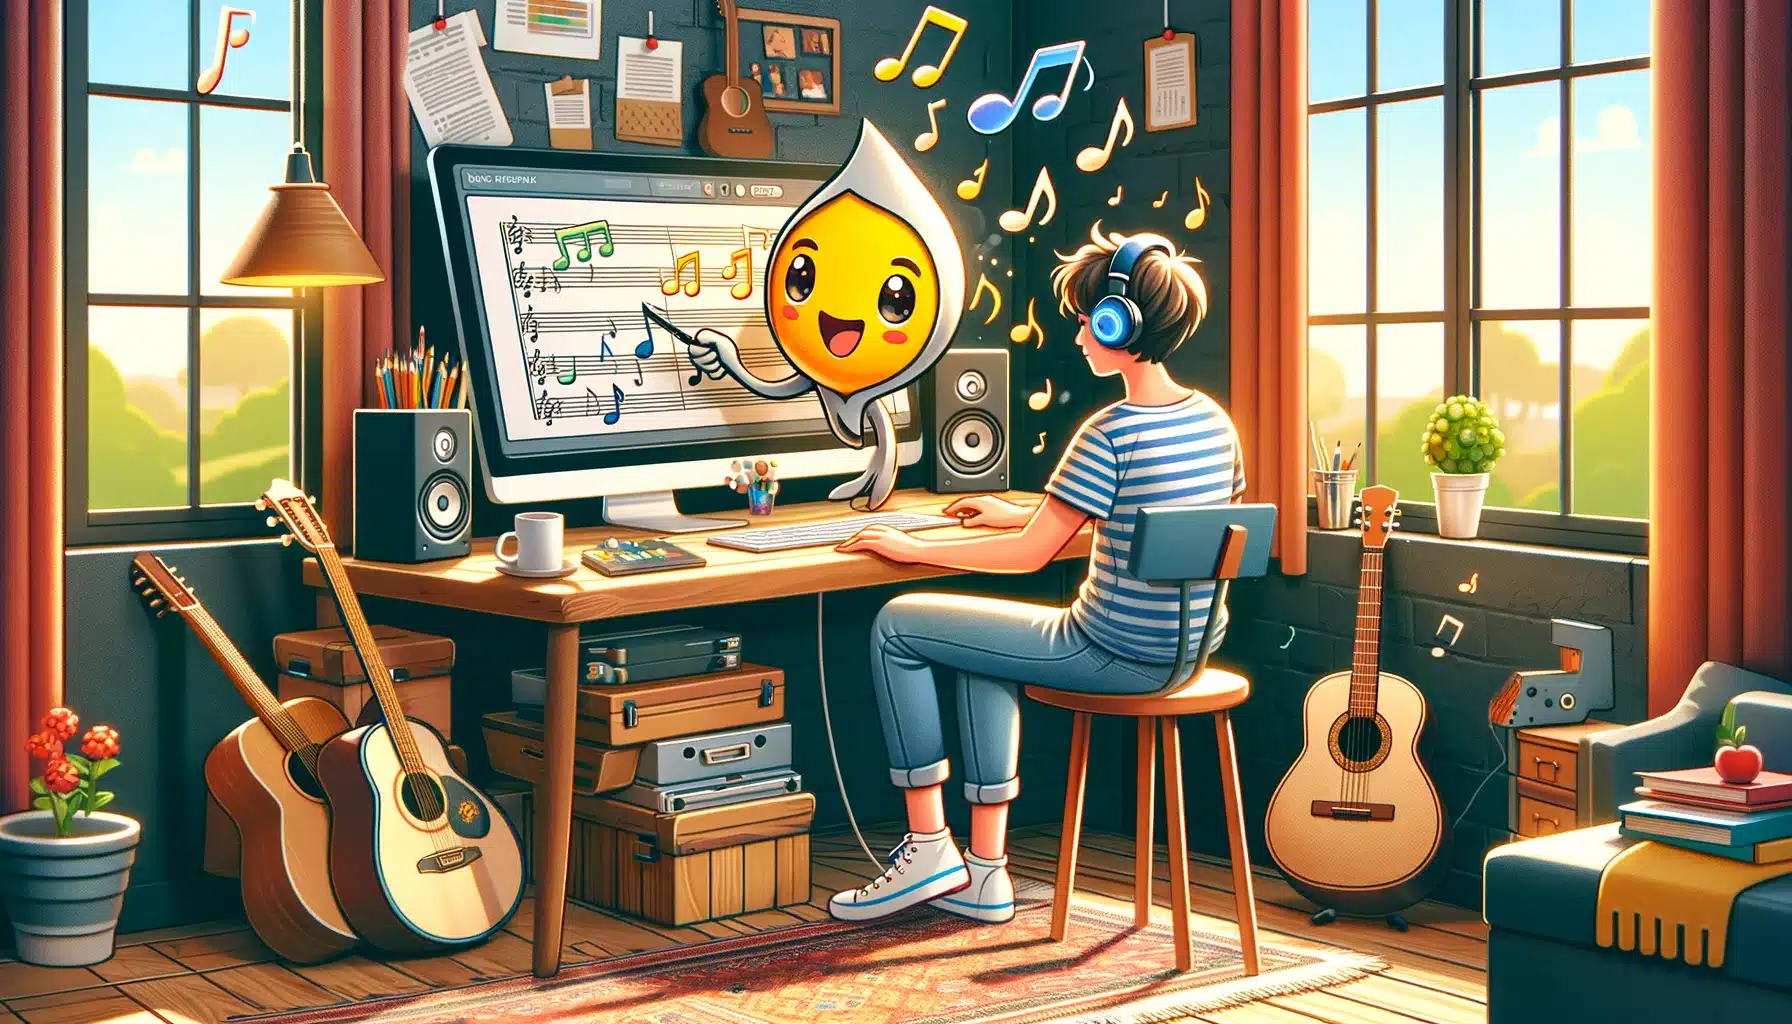 The image depicts a young songwriter sitting at a desk in a cozy room filled with musical instruments, such as a guitar, a keyboard, and headphones. There is a computer screen next to the ai song generator displaying a cheerful, cartoonish AI character in the form of a musical note. This character seems to be interacting with the songwriter, suggesting its role in assisting the songwriting process. Musical notes float in the air around them, symbolizing the flow of creativity and inspiration resulting from the collaboration between the human and the AI. The atmosphere is bright and filled with creative energy, providing an inviting and imaginative setting.